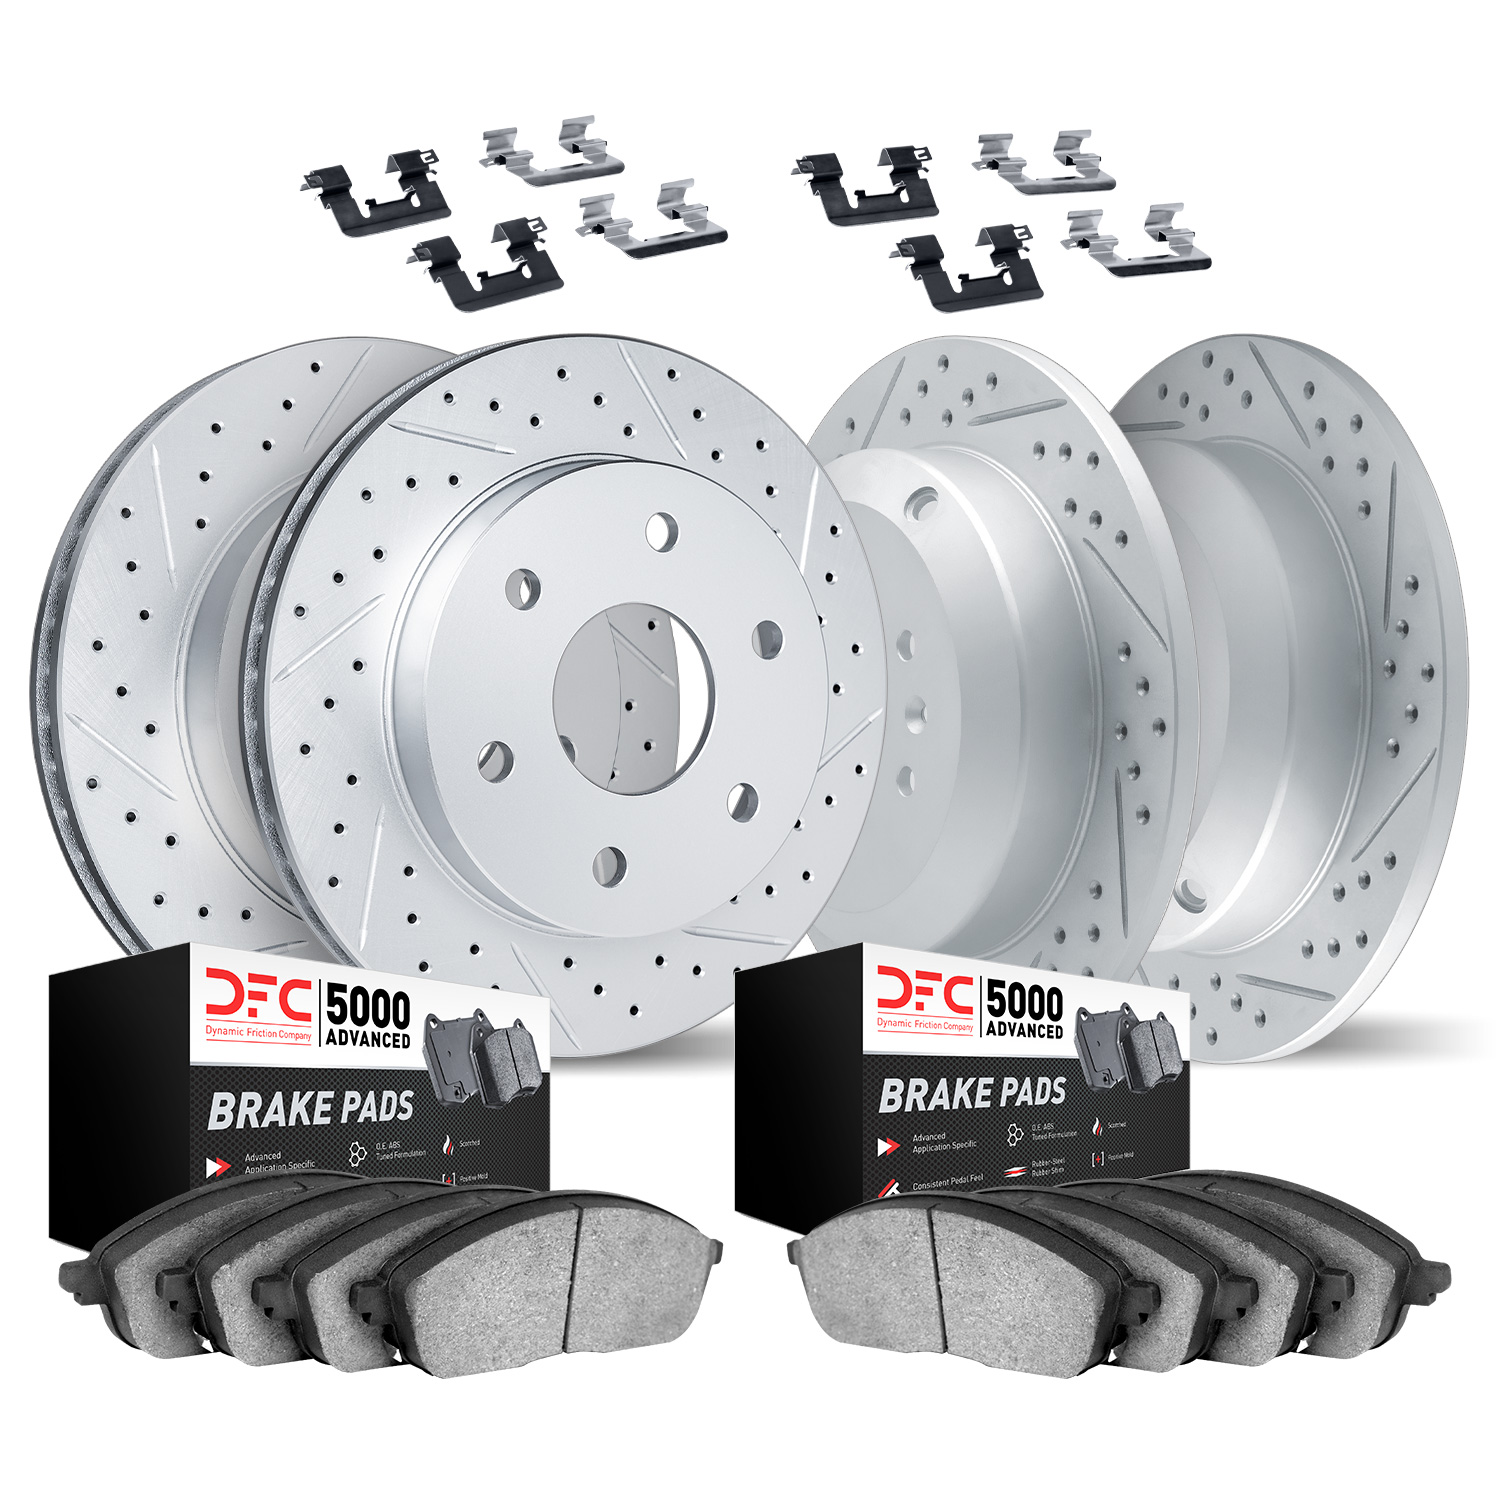 2514-52008 Geoperformance Drilled/Slotted Rotors w/5000 Advanced Brake Pads Kit & Hardware, 2006-2006 GM, Position: Front and Re